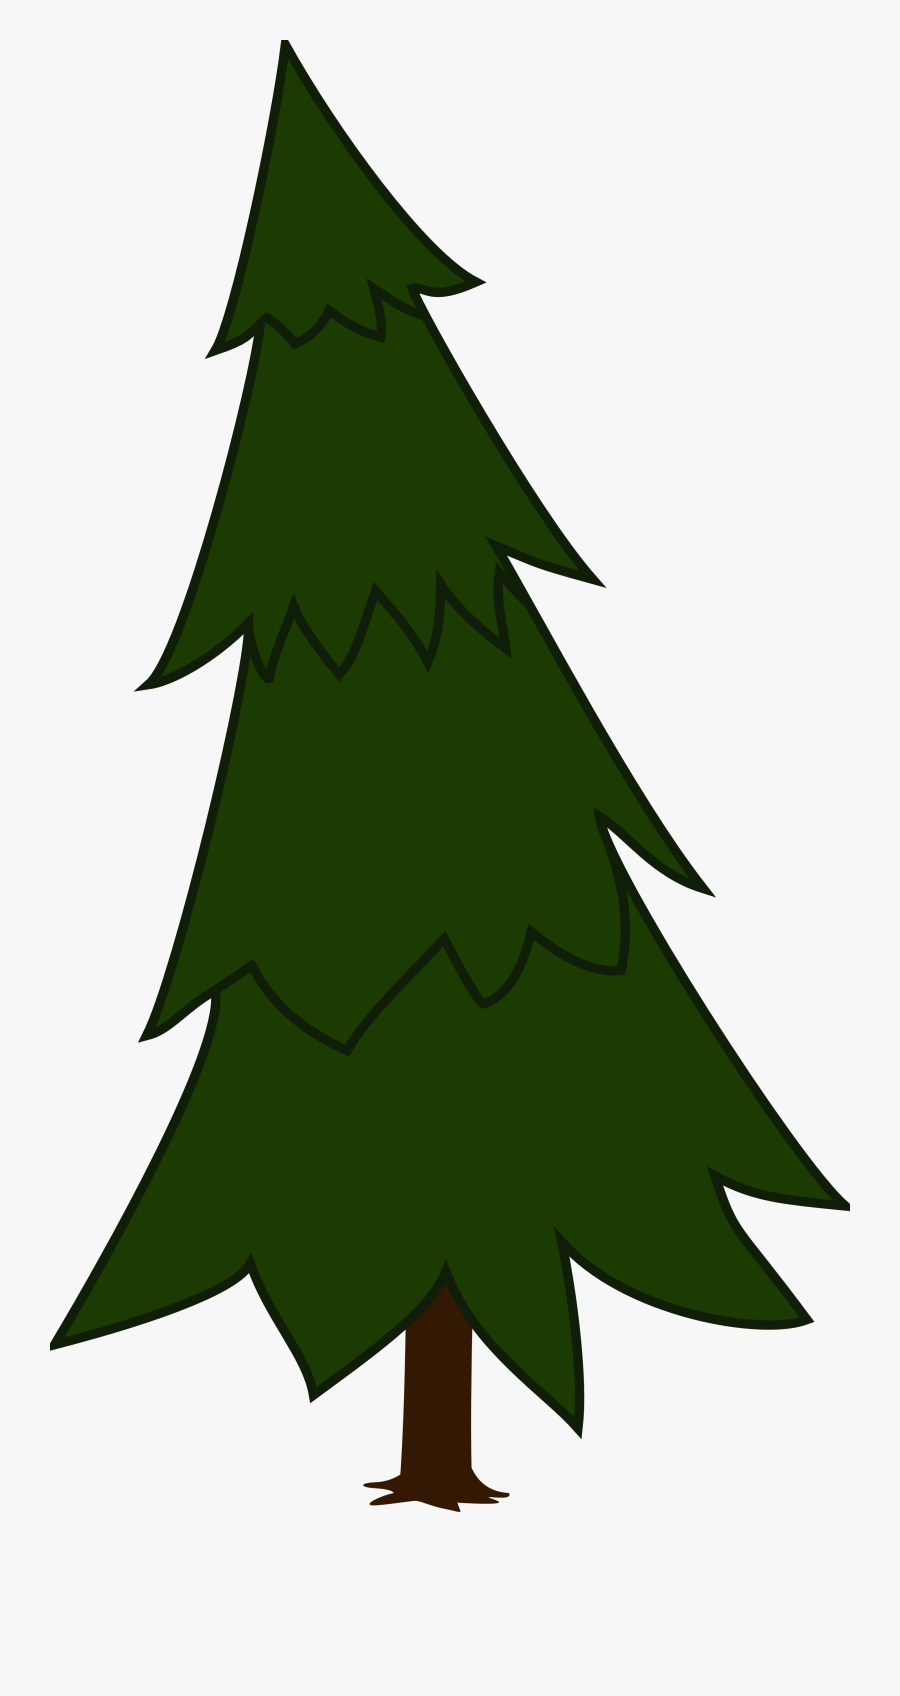 Download Pine Tree Svg Clipart Tree Clipart Pine Free Transparent Clipart Clipartkey